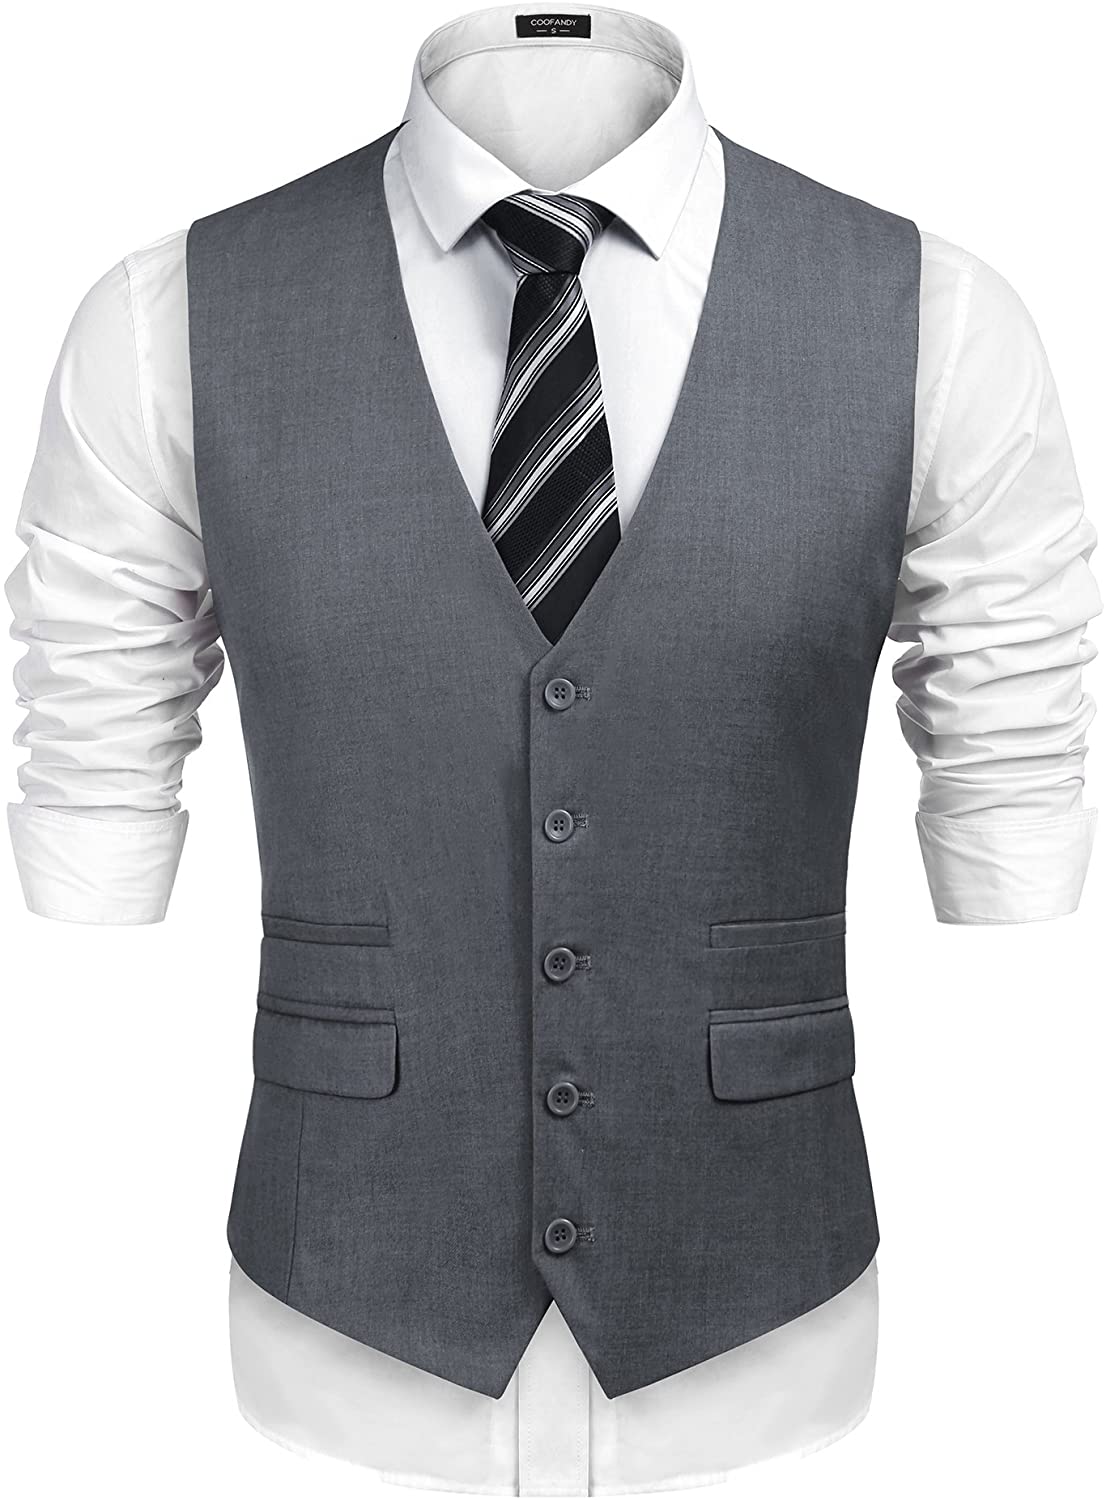 Coofandy Mens Waistcoat Casual Slim Fit Double Breasted Plaid Waistcoat Vest with Pocket for Wedding/Business/Party 